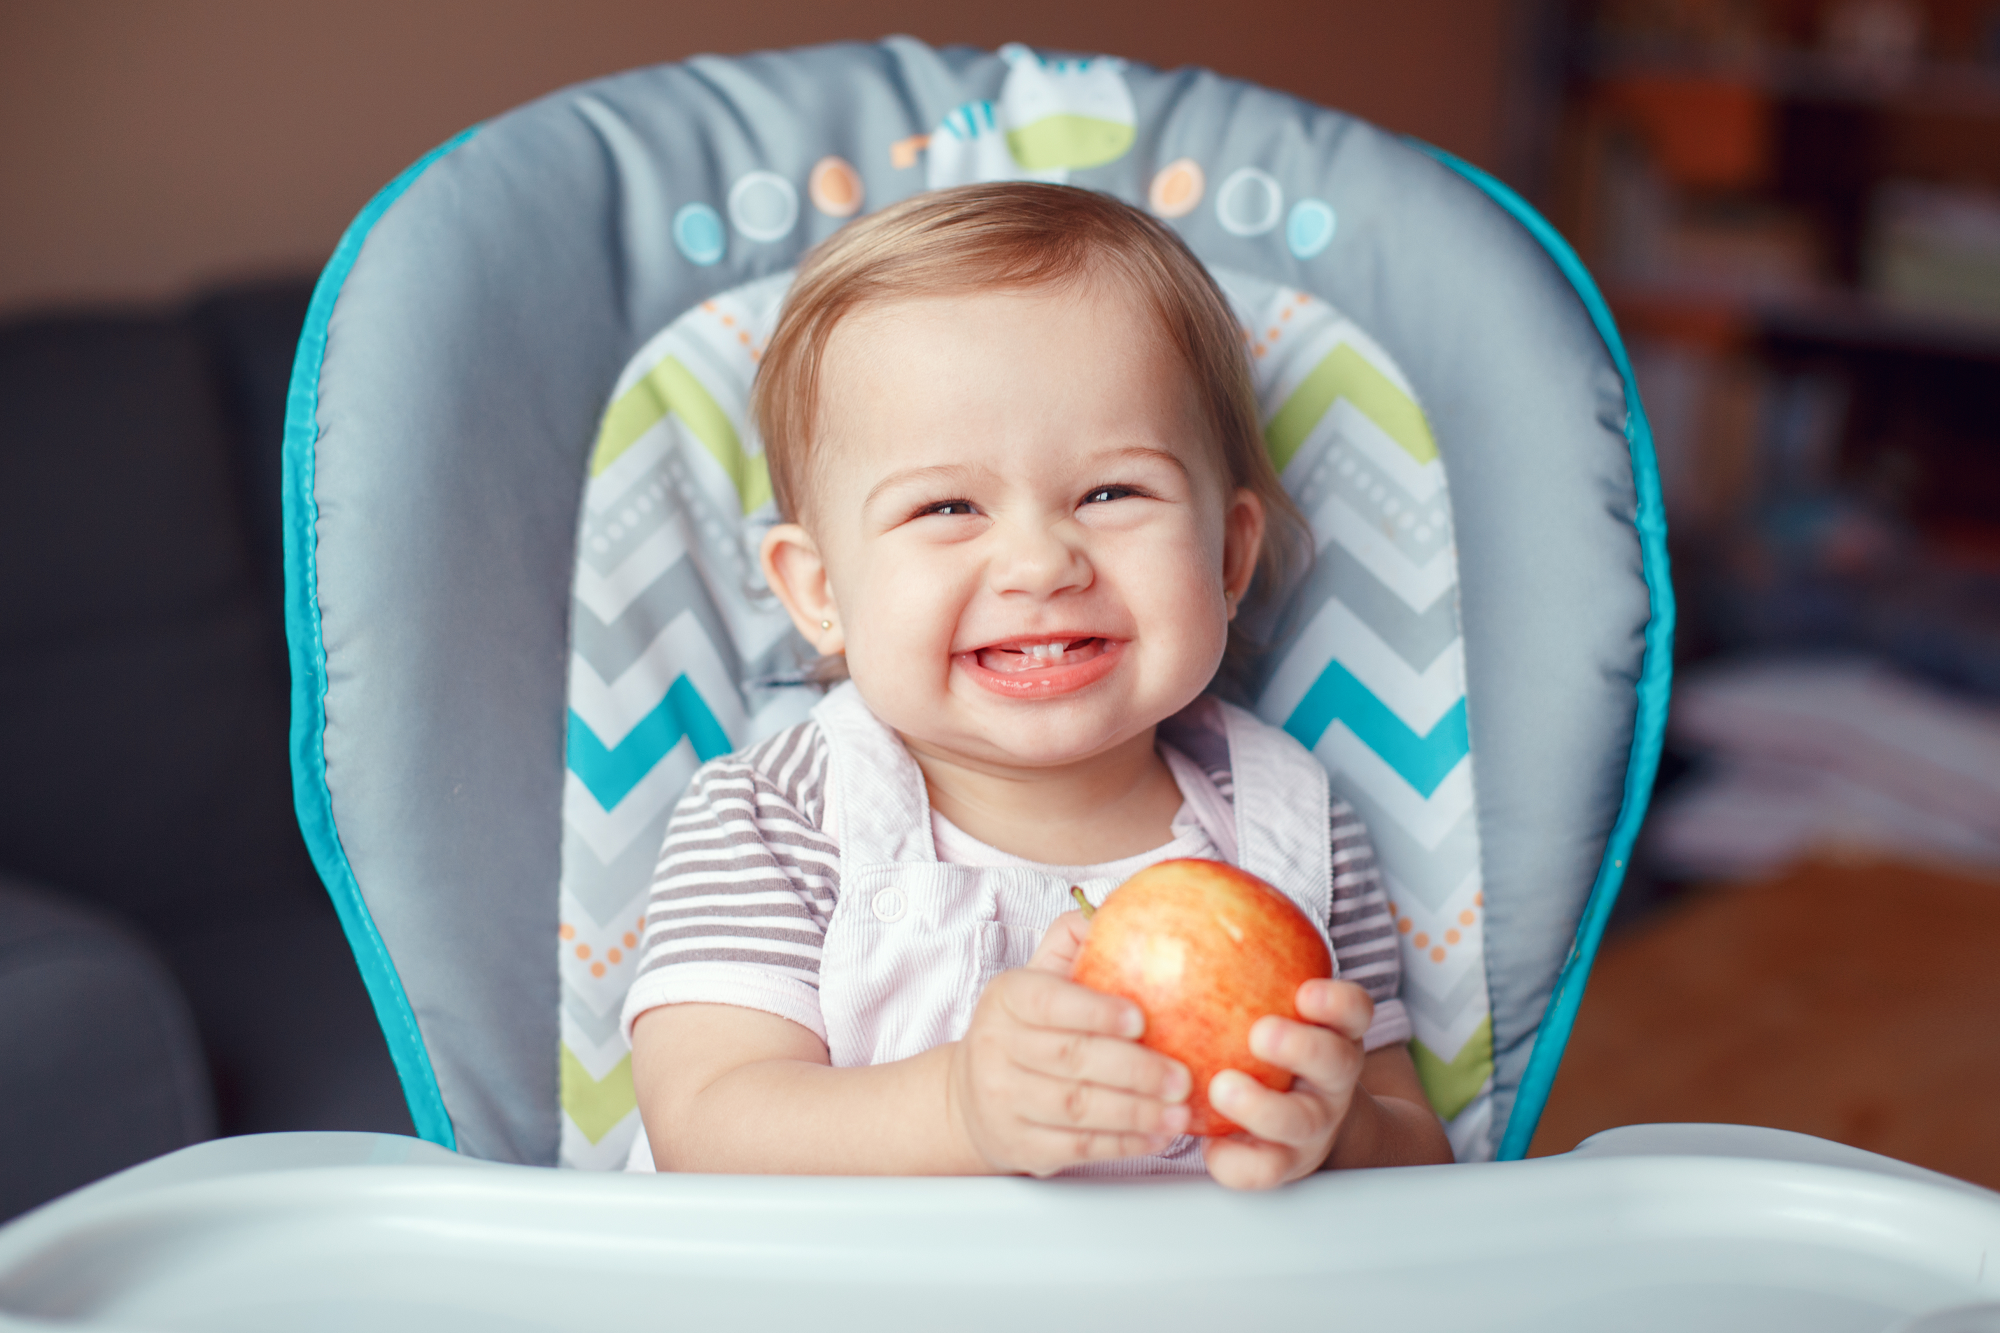 Calcium is a crucial ingredient for your baby's growth and development